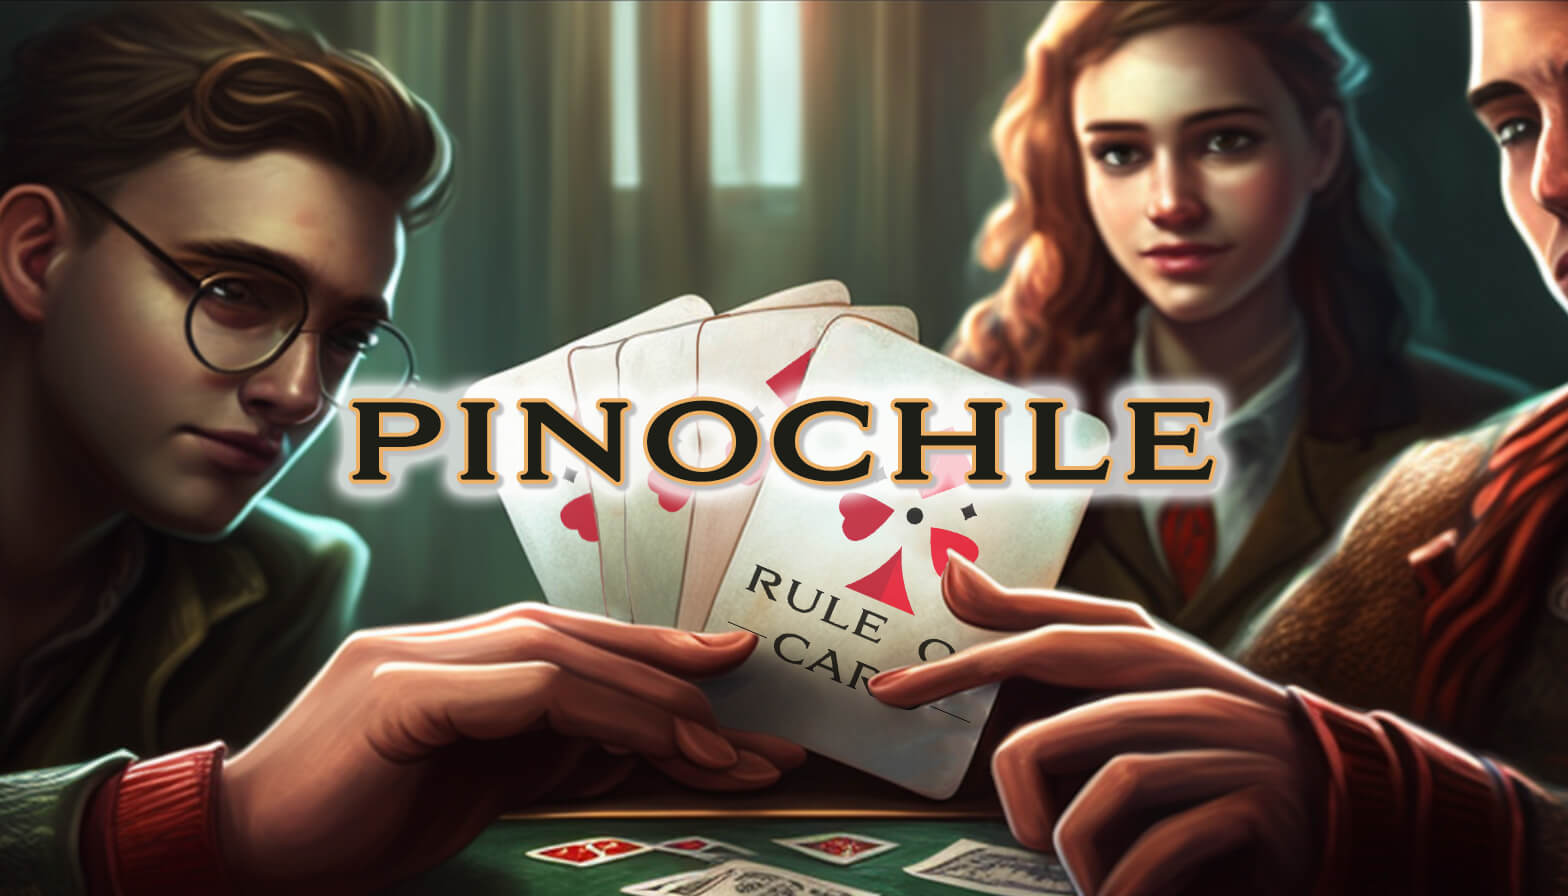 Playing the card game Pinochle